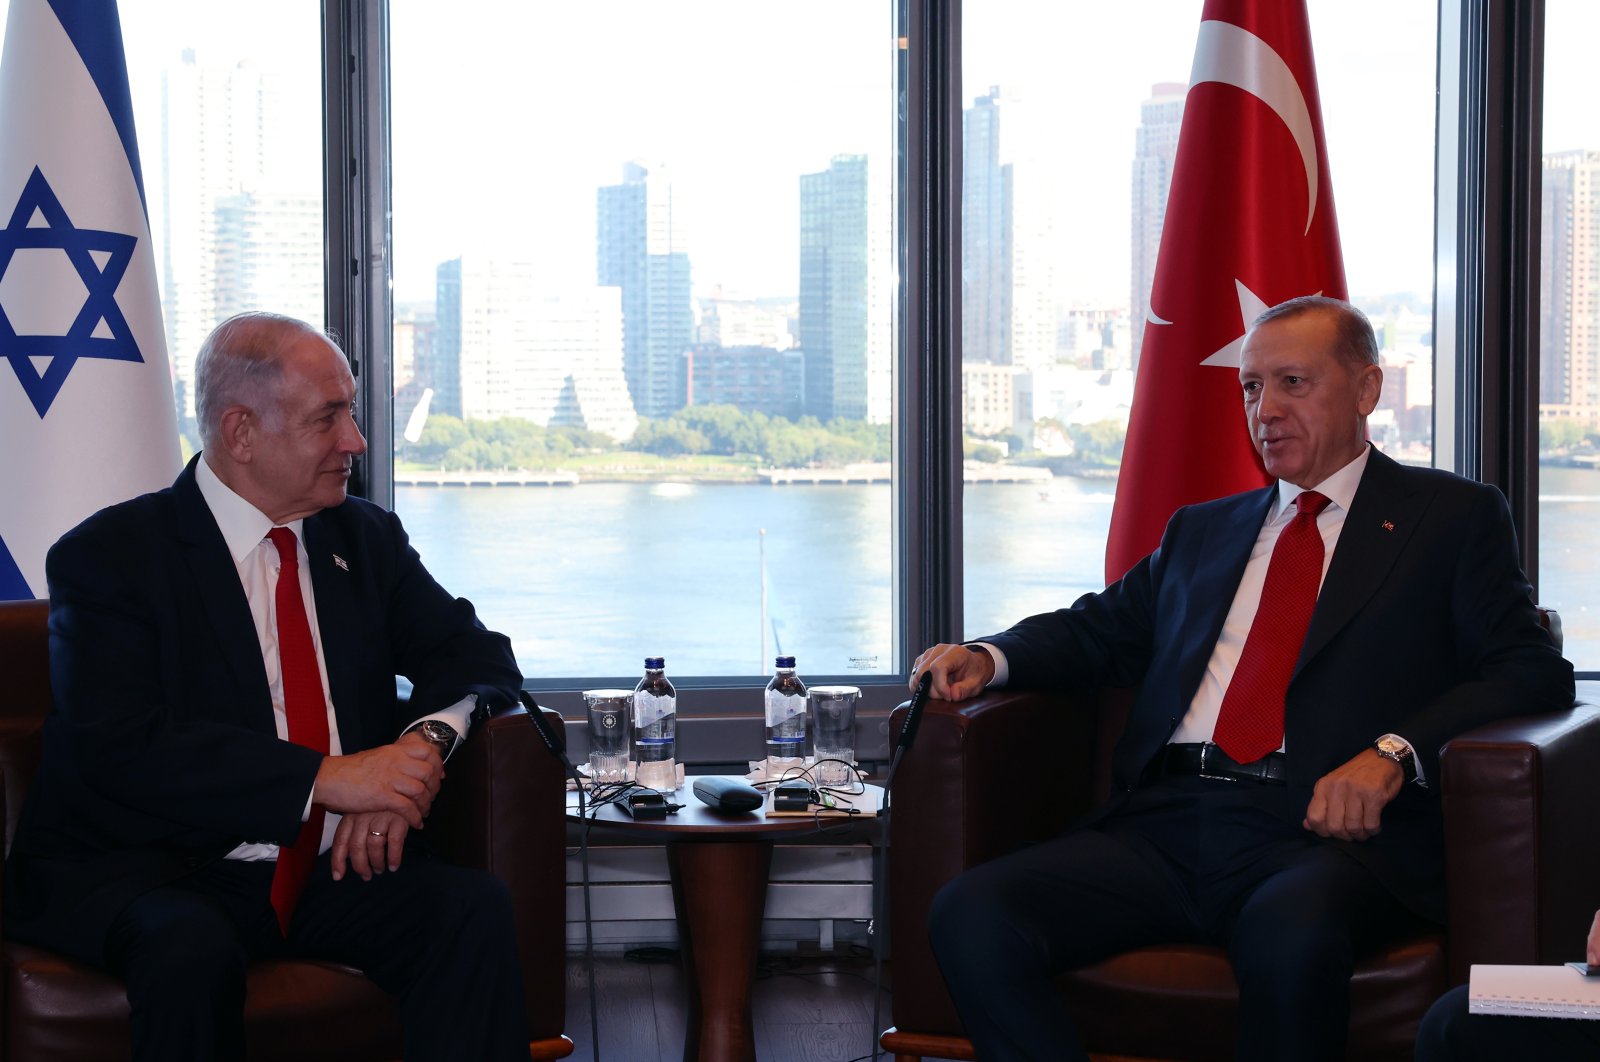 President Recep Tayyip Erdoğan receives Israeli Prime Minister Benjamin Netanyahu (L) at the Turkish House (Türkevi) during a U.S. visit for the 78th session of the United Nations General Assembly, New York, U.S., Sept. 19, 2023. (AA Photo)